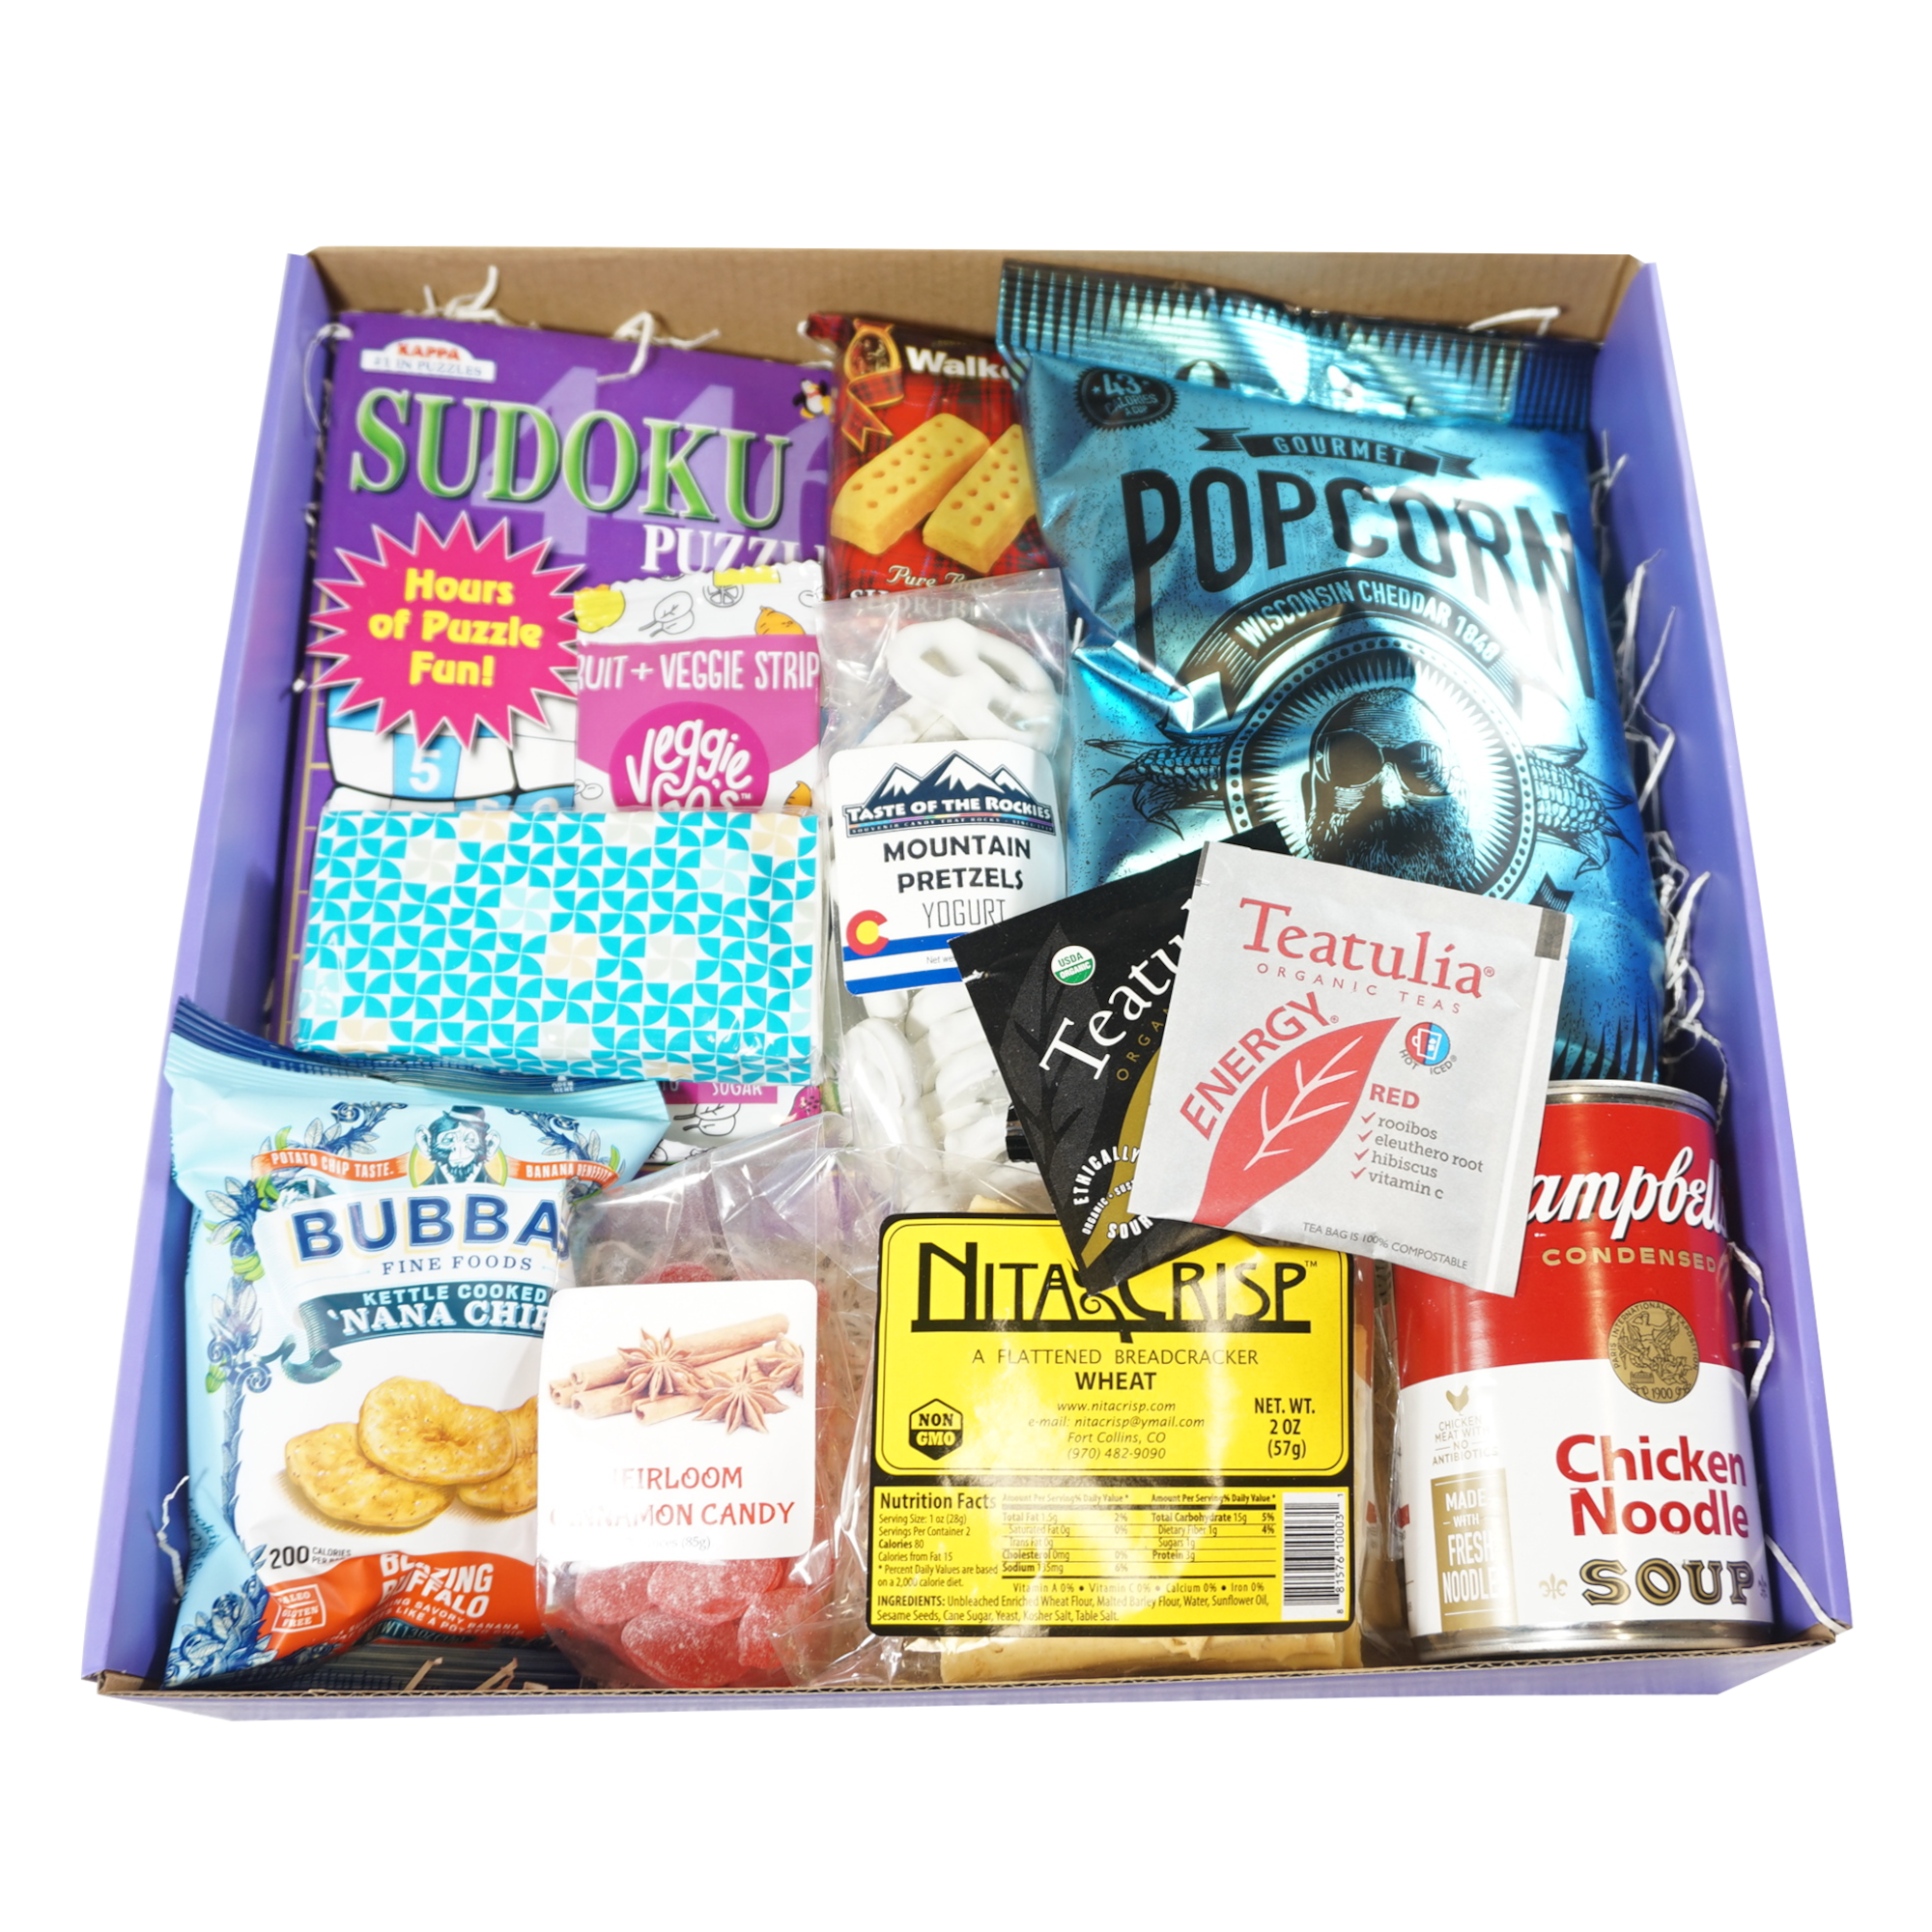 Get Well Gift Box